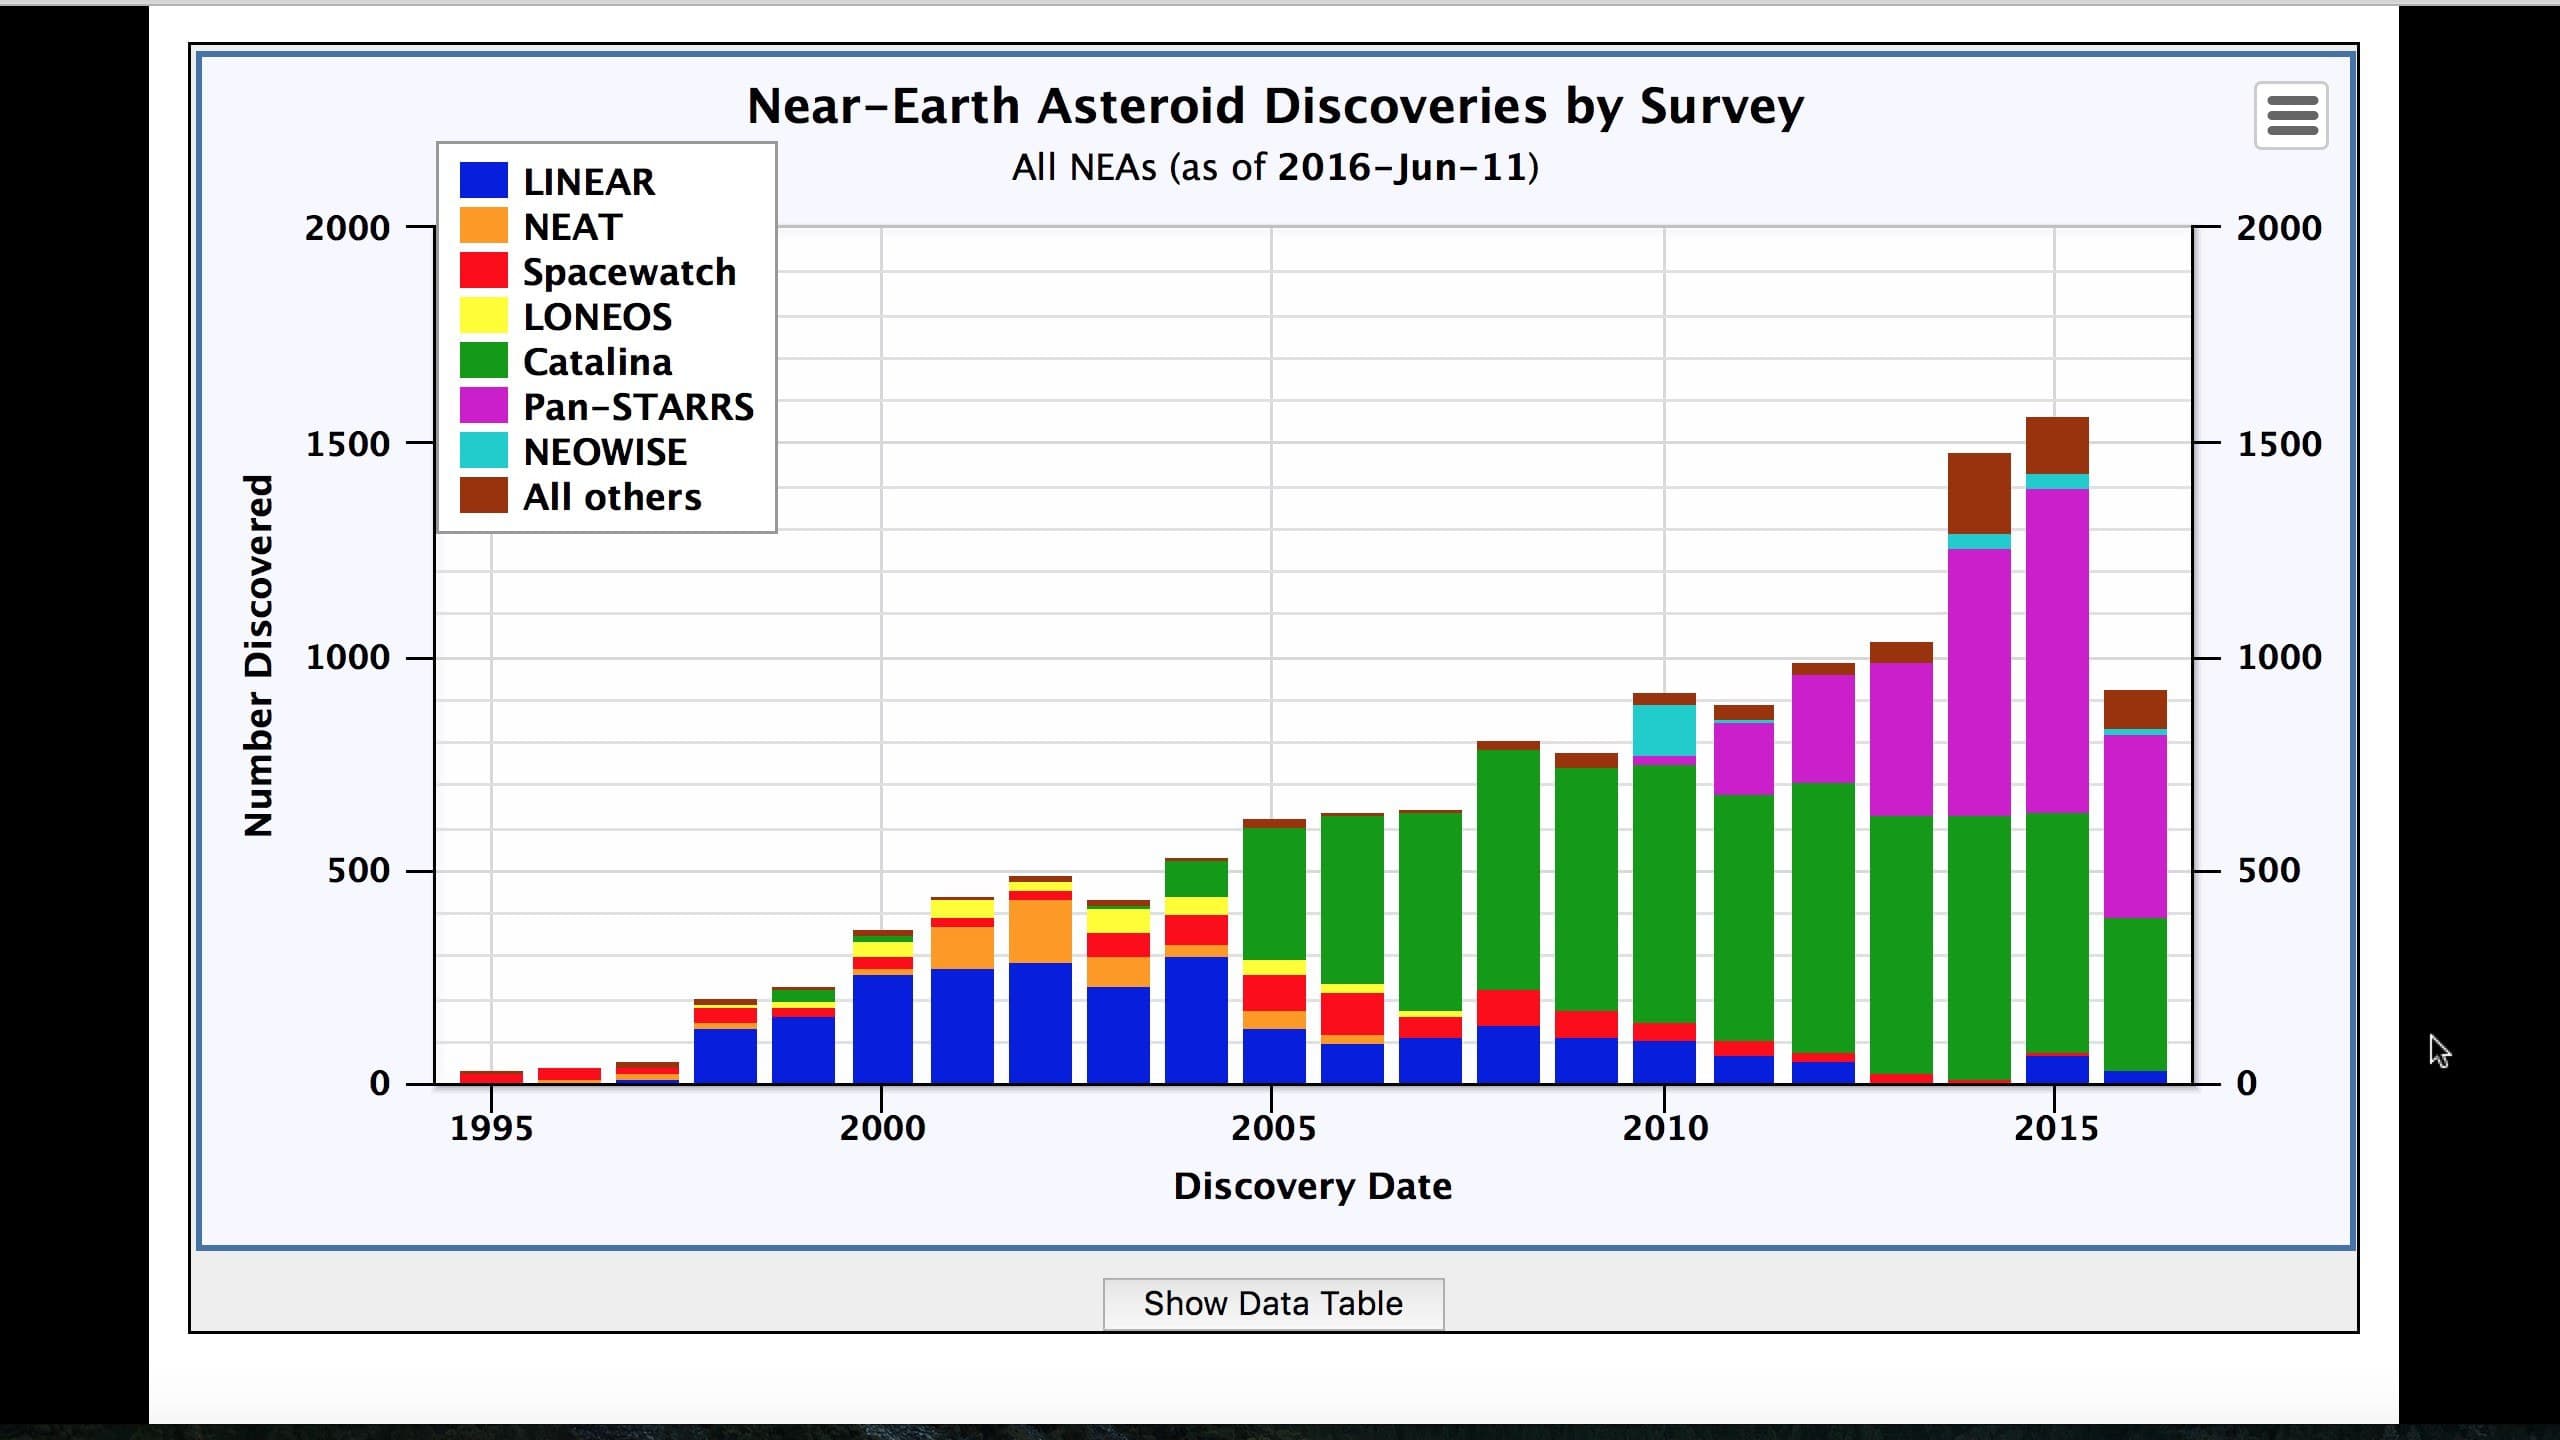 Near Earth Asteroid discoveries by survey.